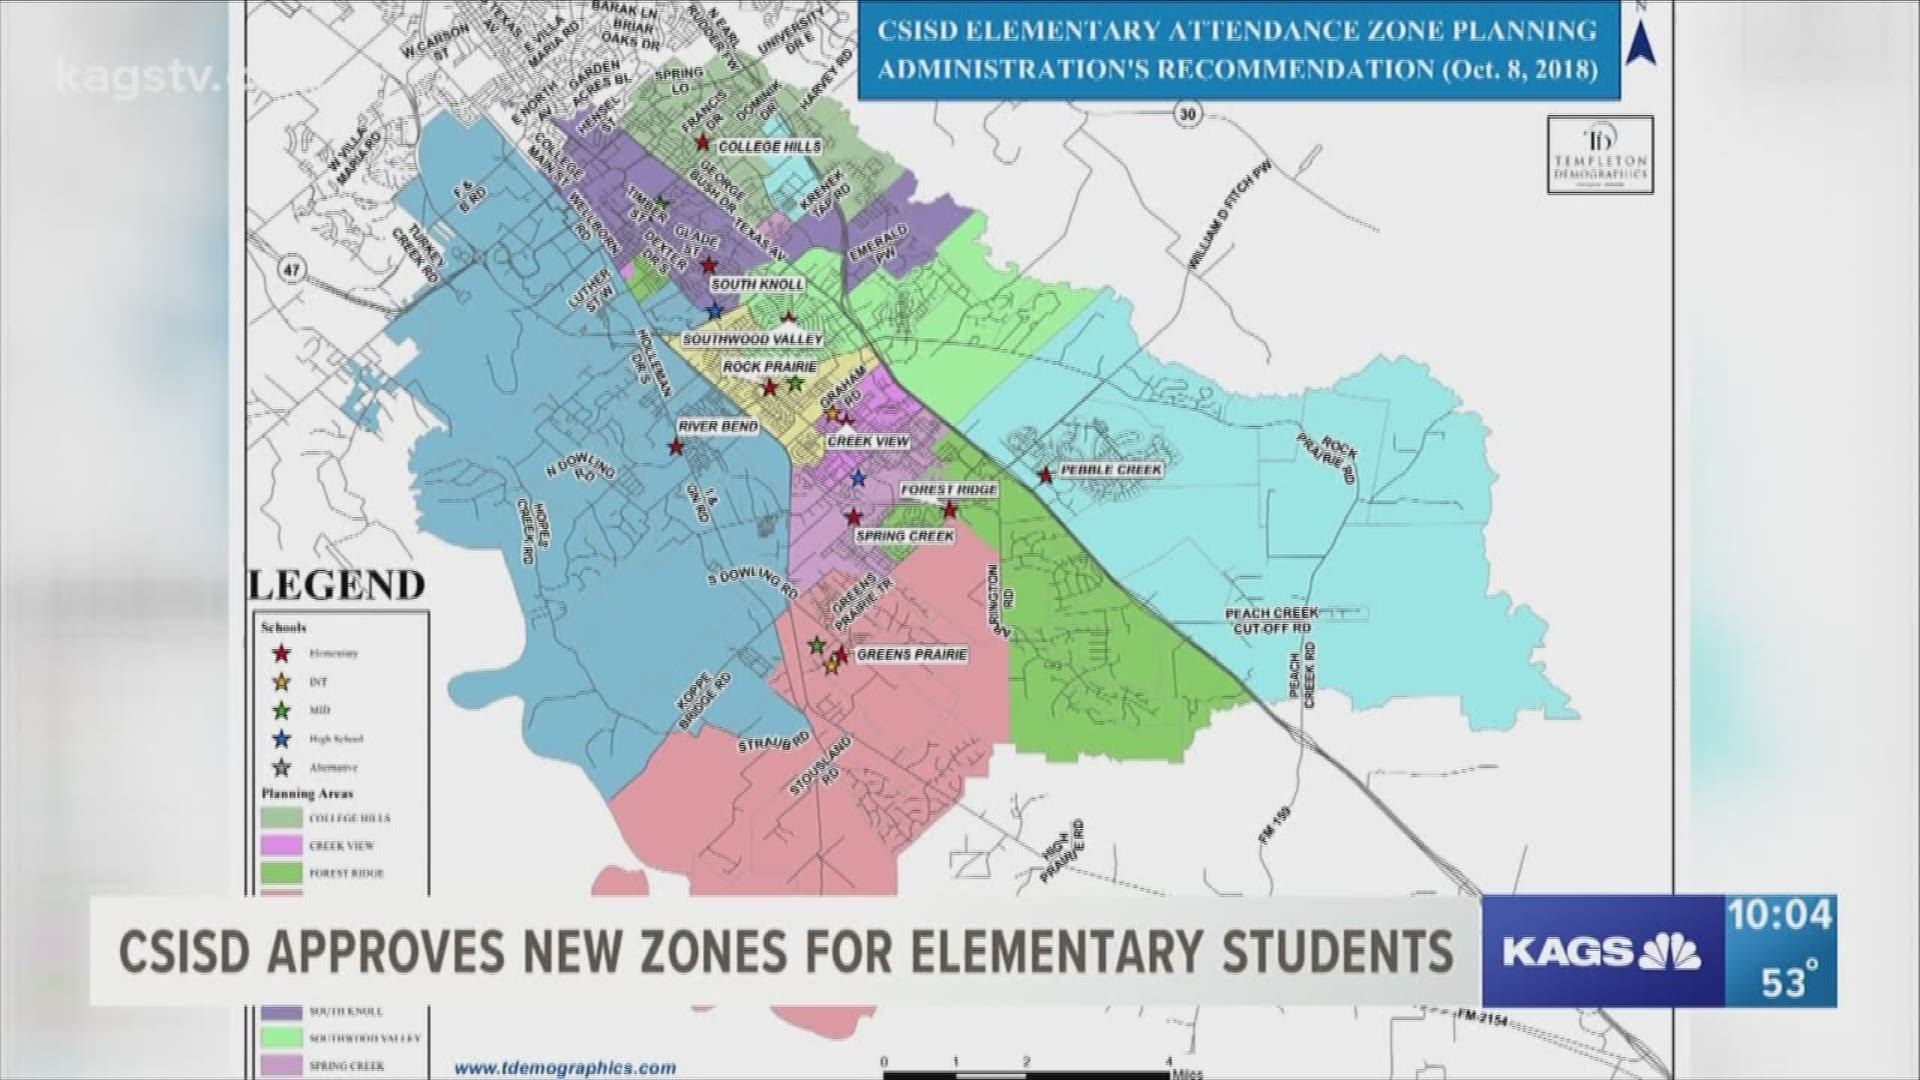 Earlier this evening the CSISD school board unanimously approved the new elementary zones to accommodate for the opening of River Bend Elementary.